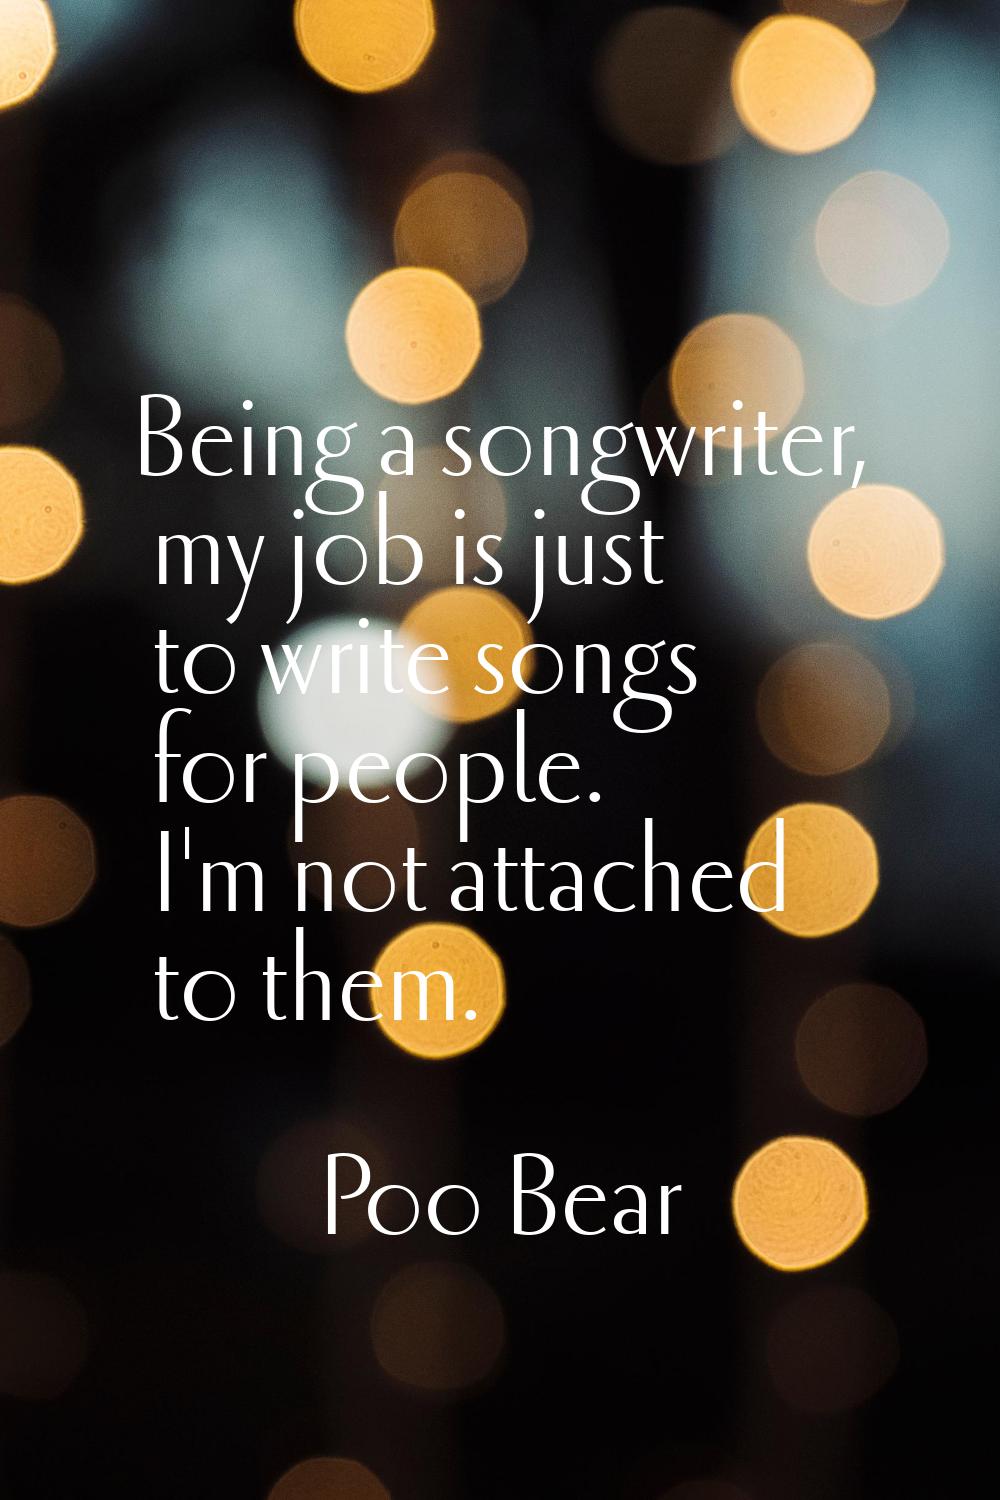 Being a songwriter, my job is just to write songs for people. I'm not attached to them.